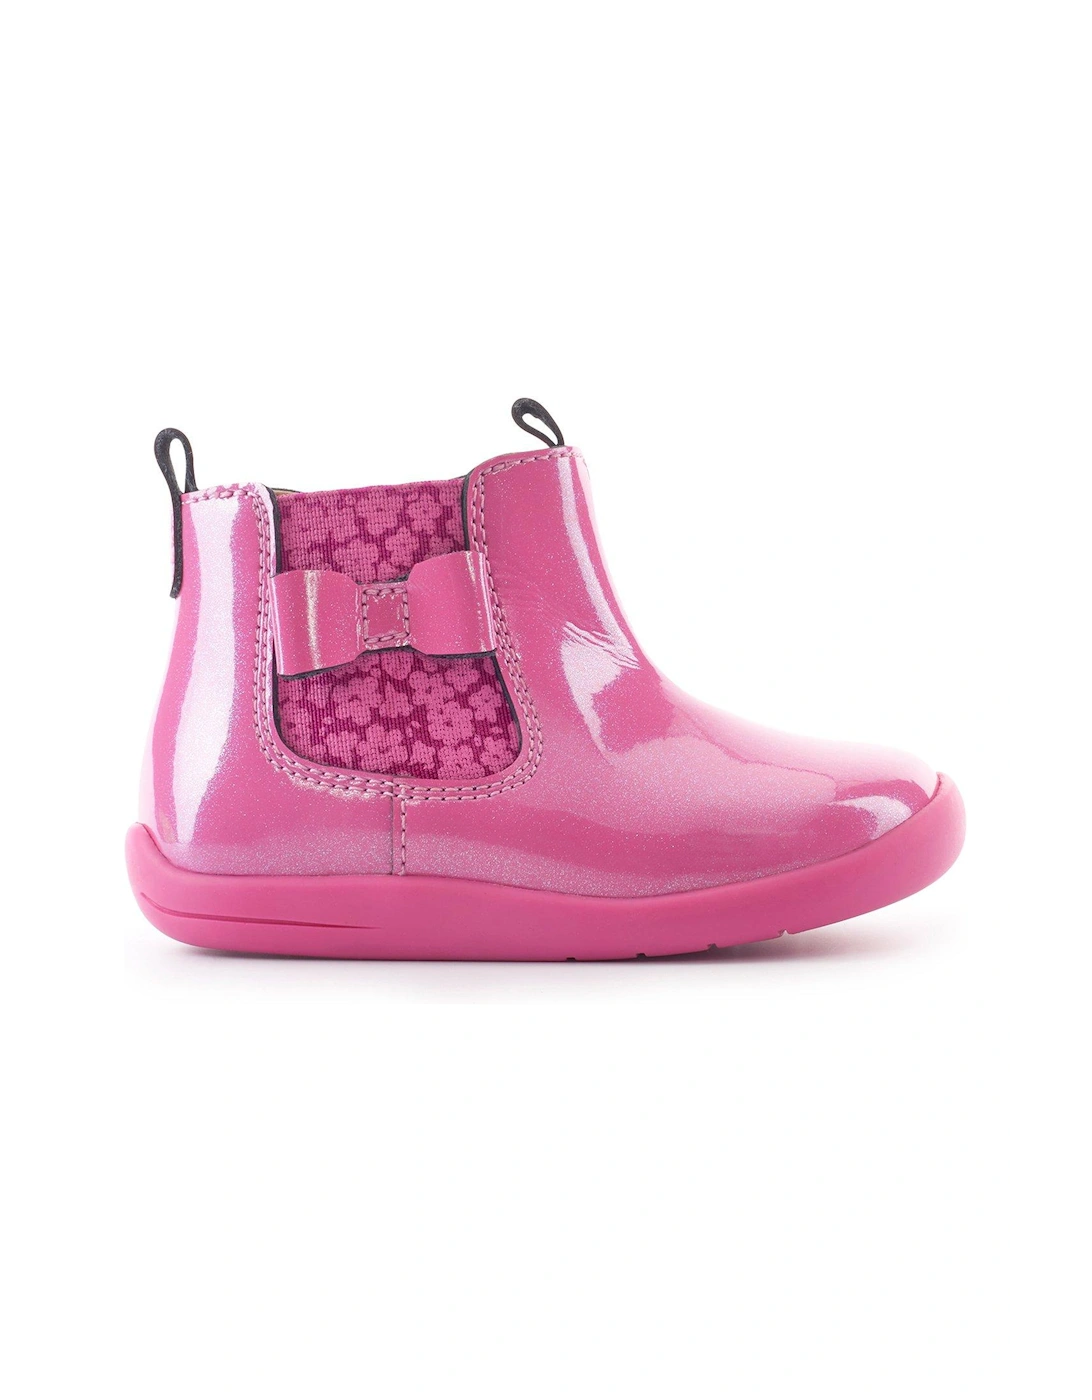 Wonderland Girls Glitter Patent Leather Bow Zip Up First Boots - Pink, 3 of 2